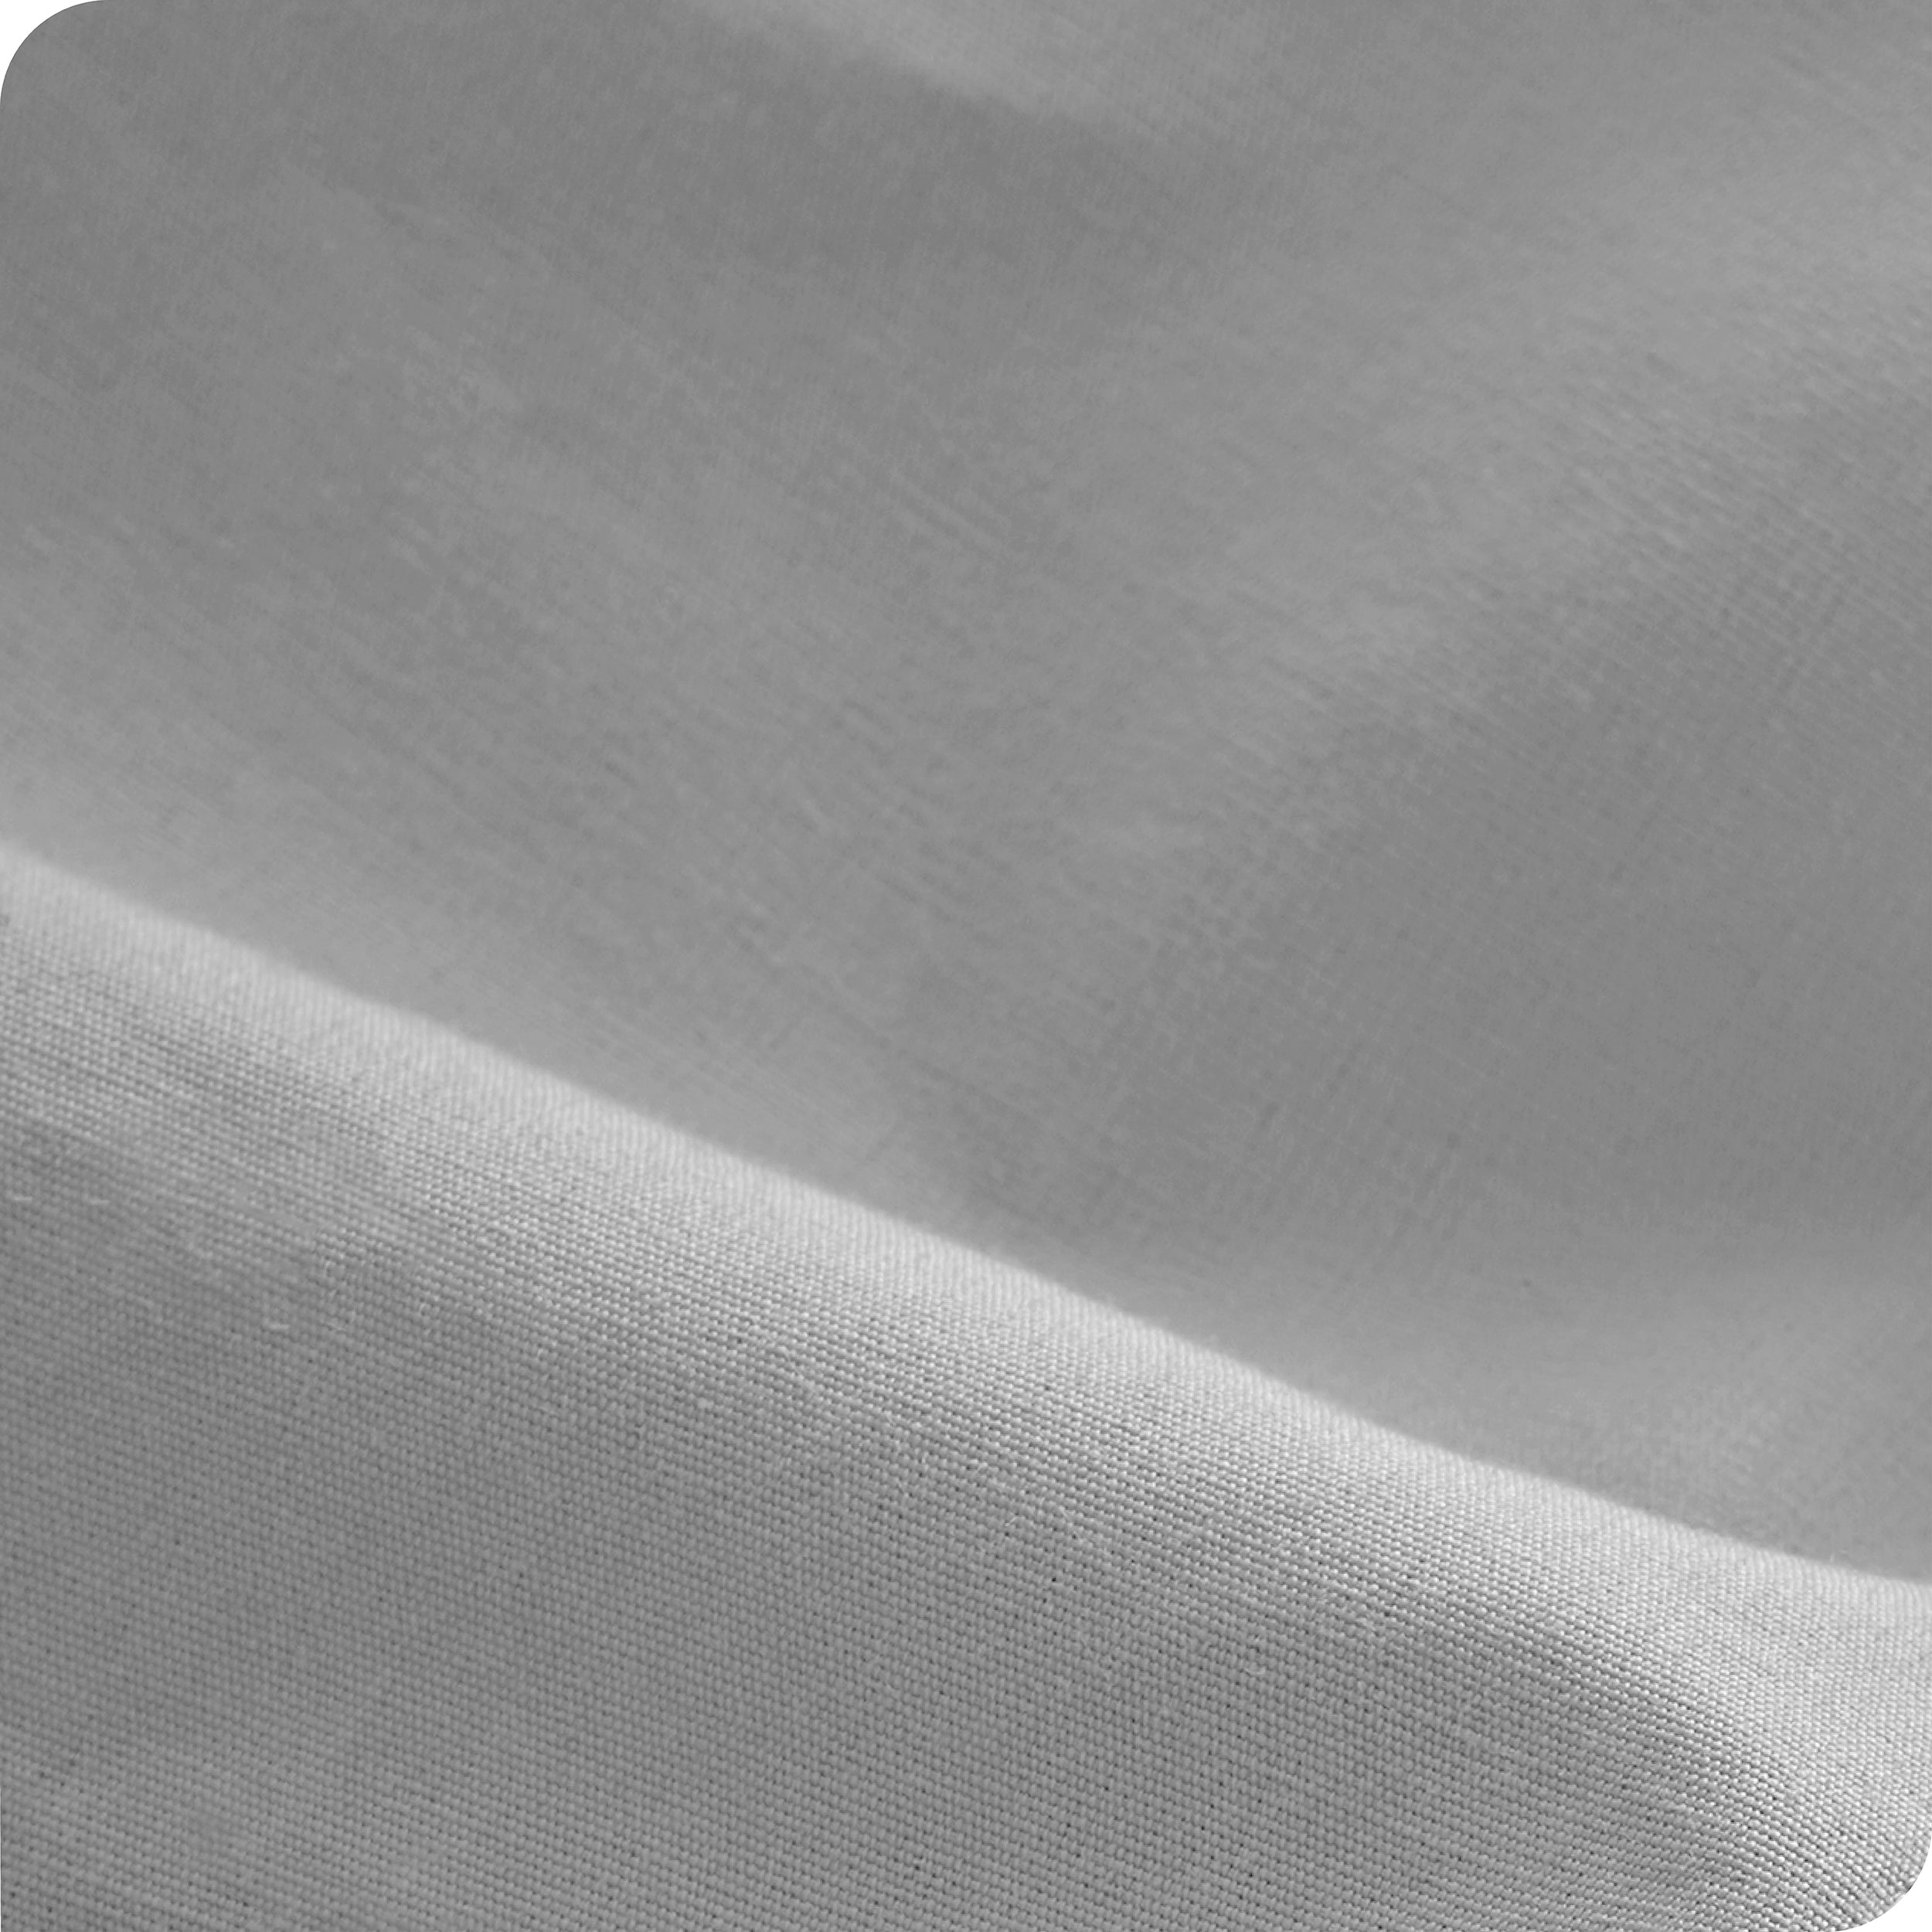 Close in view showing texture of organic cotton pillowcase fabric